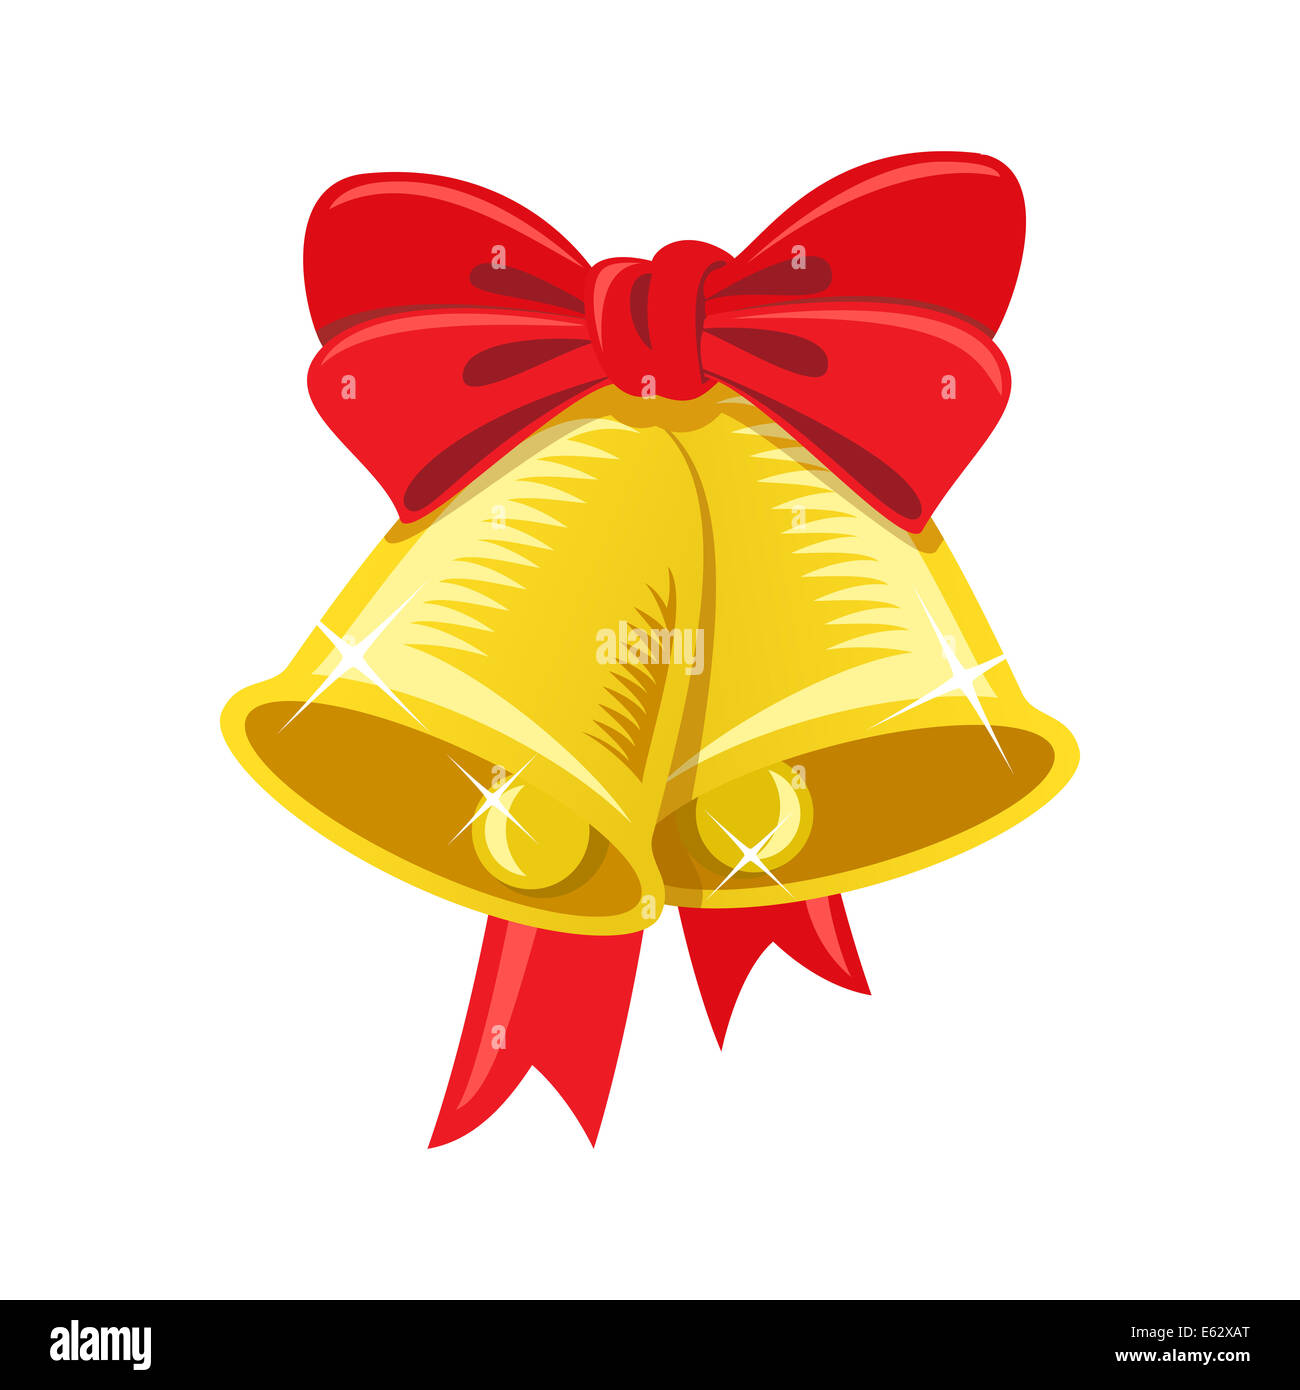 Christmas Bell with Red Bow Icon. Cartoon Stock Vector - Illustration of  background, ring: 104376639